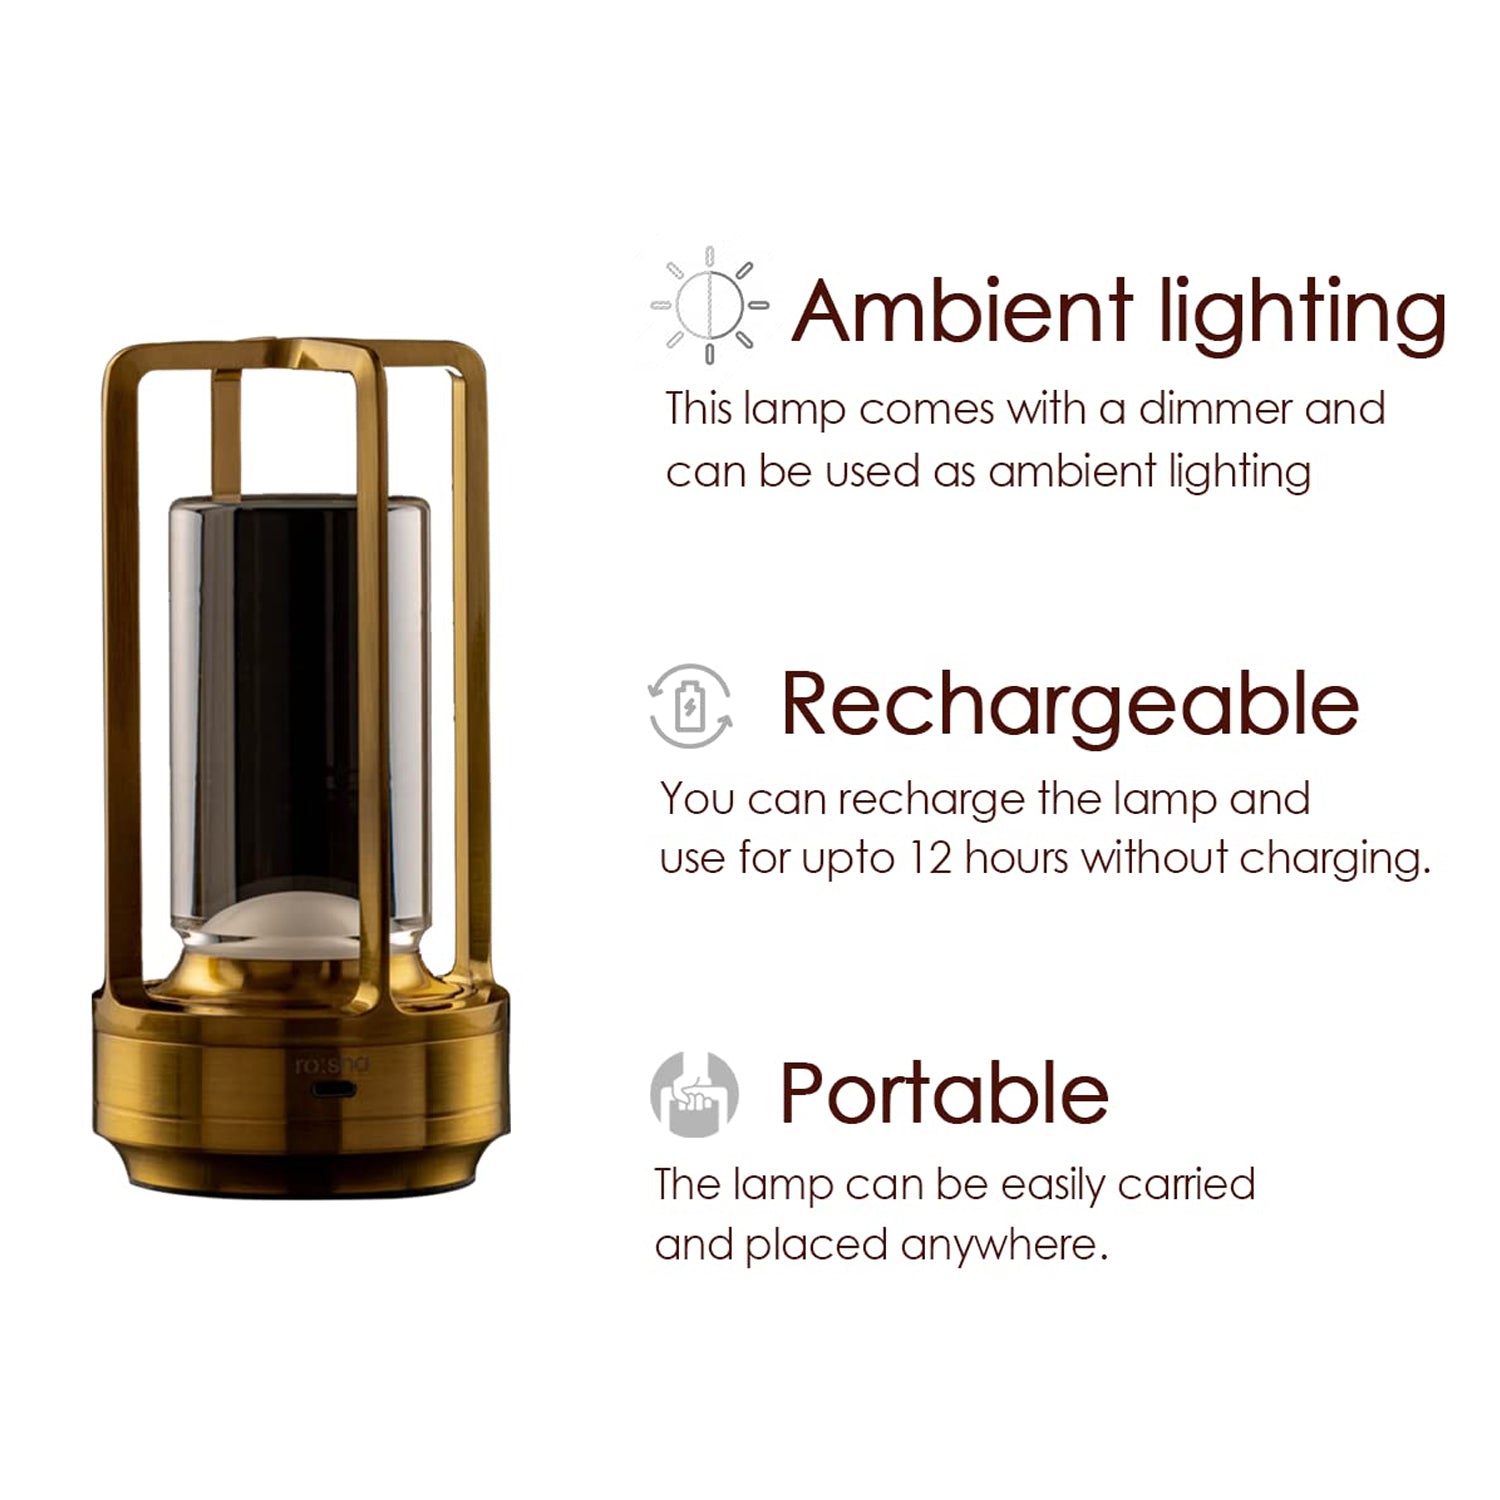 12974 Crystal Lantern Lamp, Crystal Lantern Table Lamp, 3 Colors Rechargeable Cordless Led Lights for Restaurant / Bedroom Lights (1 Pc)